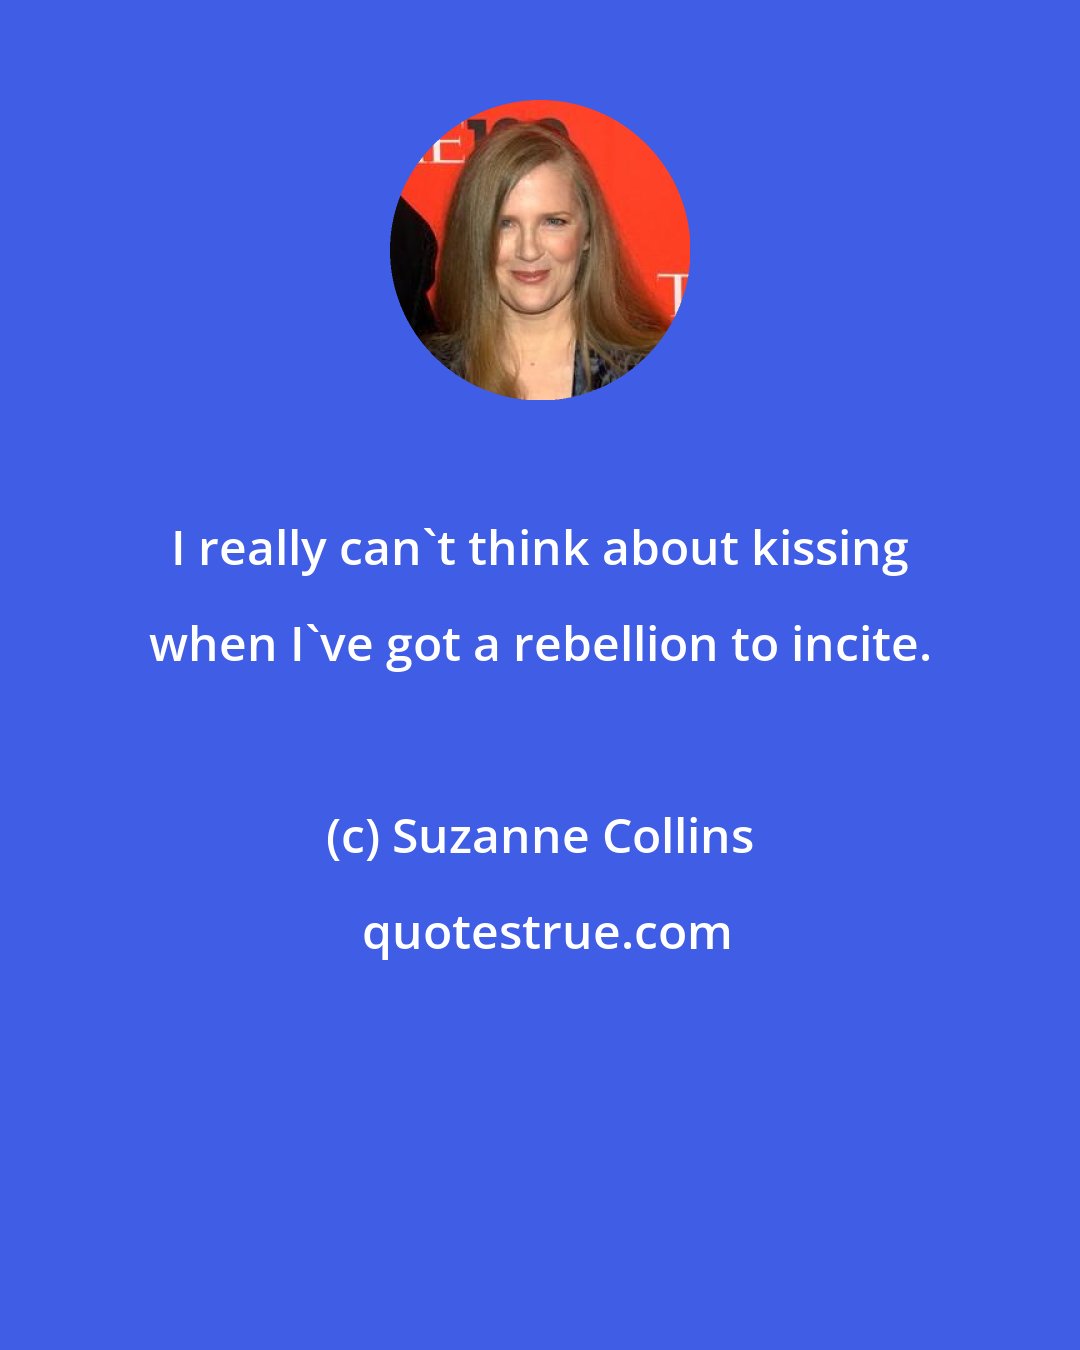 Suzanne Collins: I really can't think about kissing when I've got a rebellion to incite.